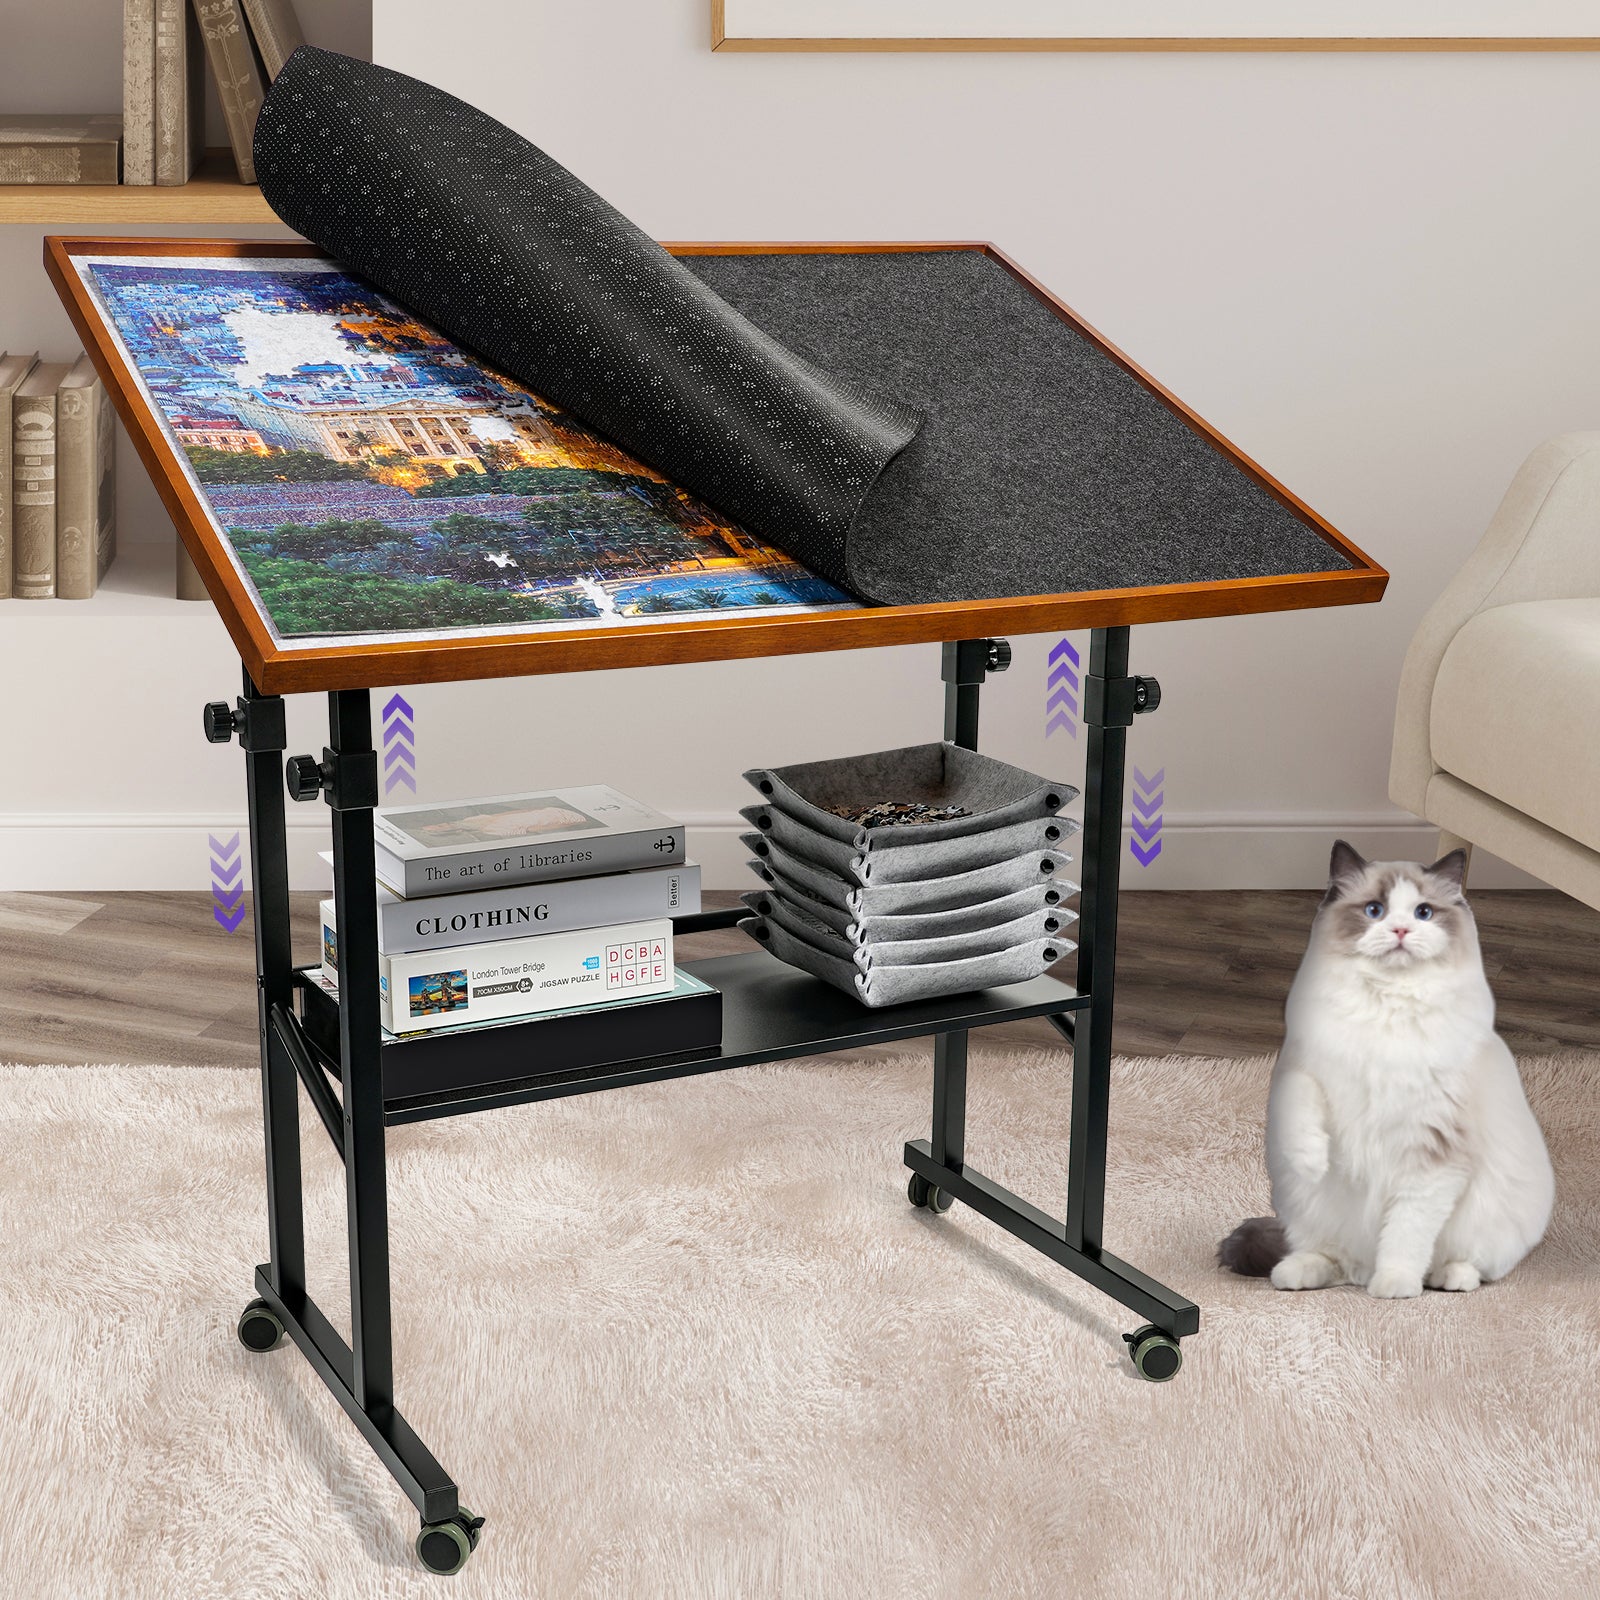  1500 Pieces Jigsaw Puzzle Table with Drawers and Legs